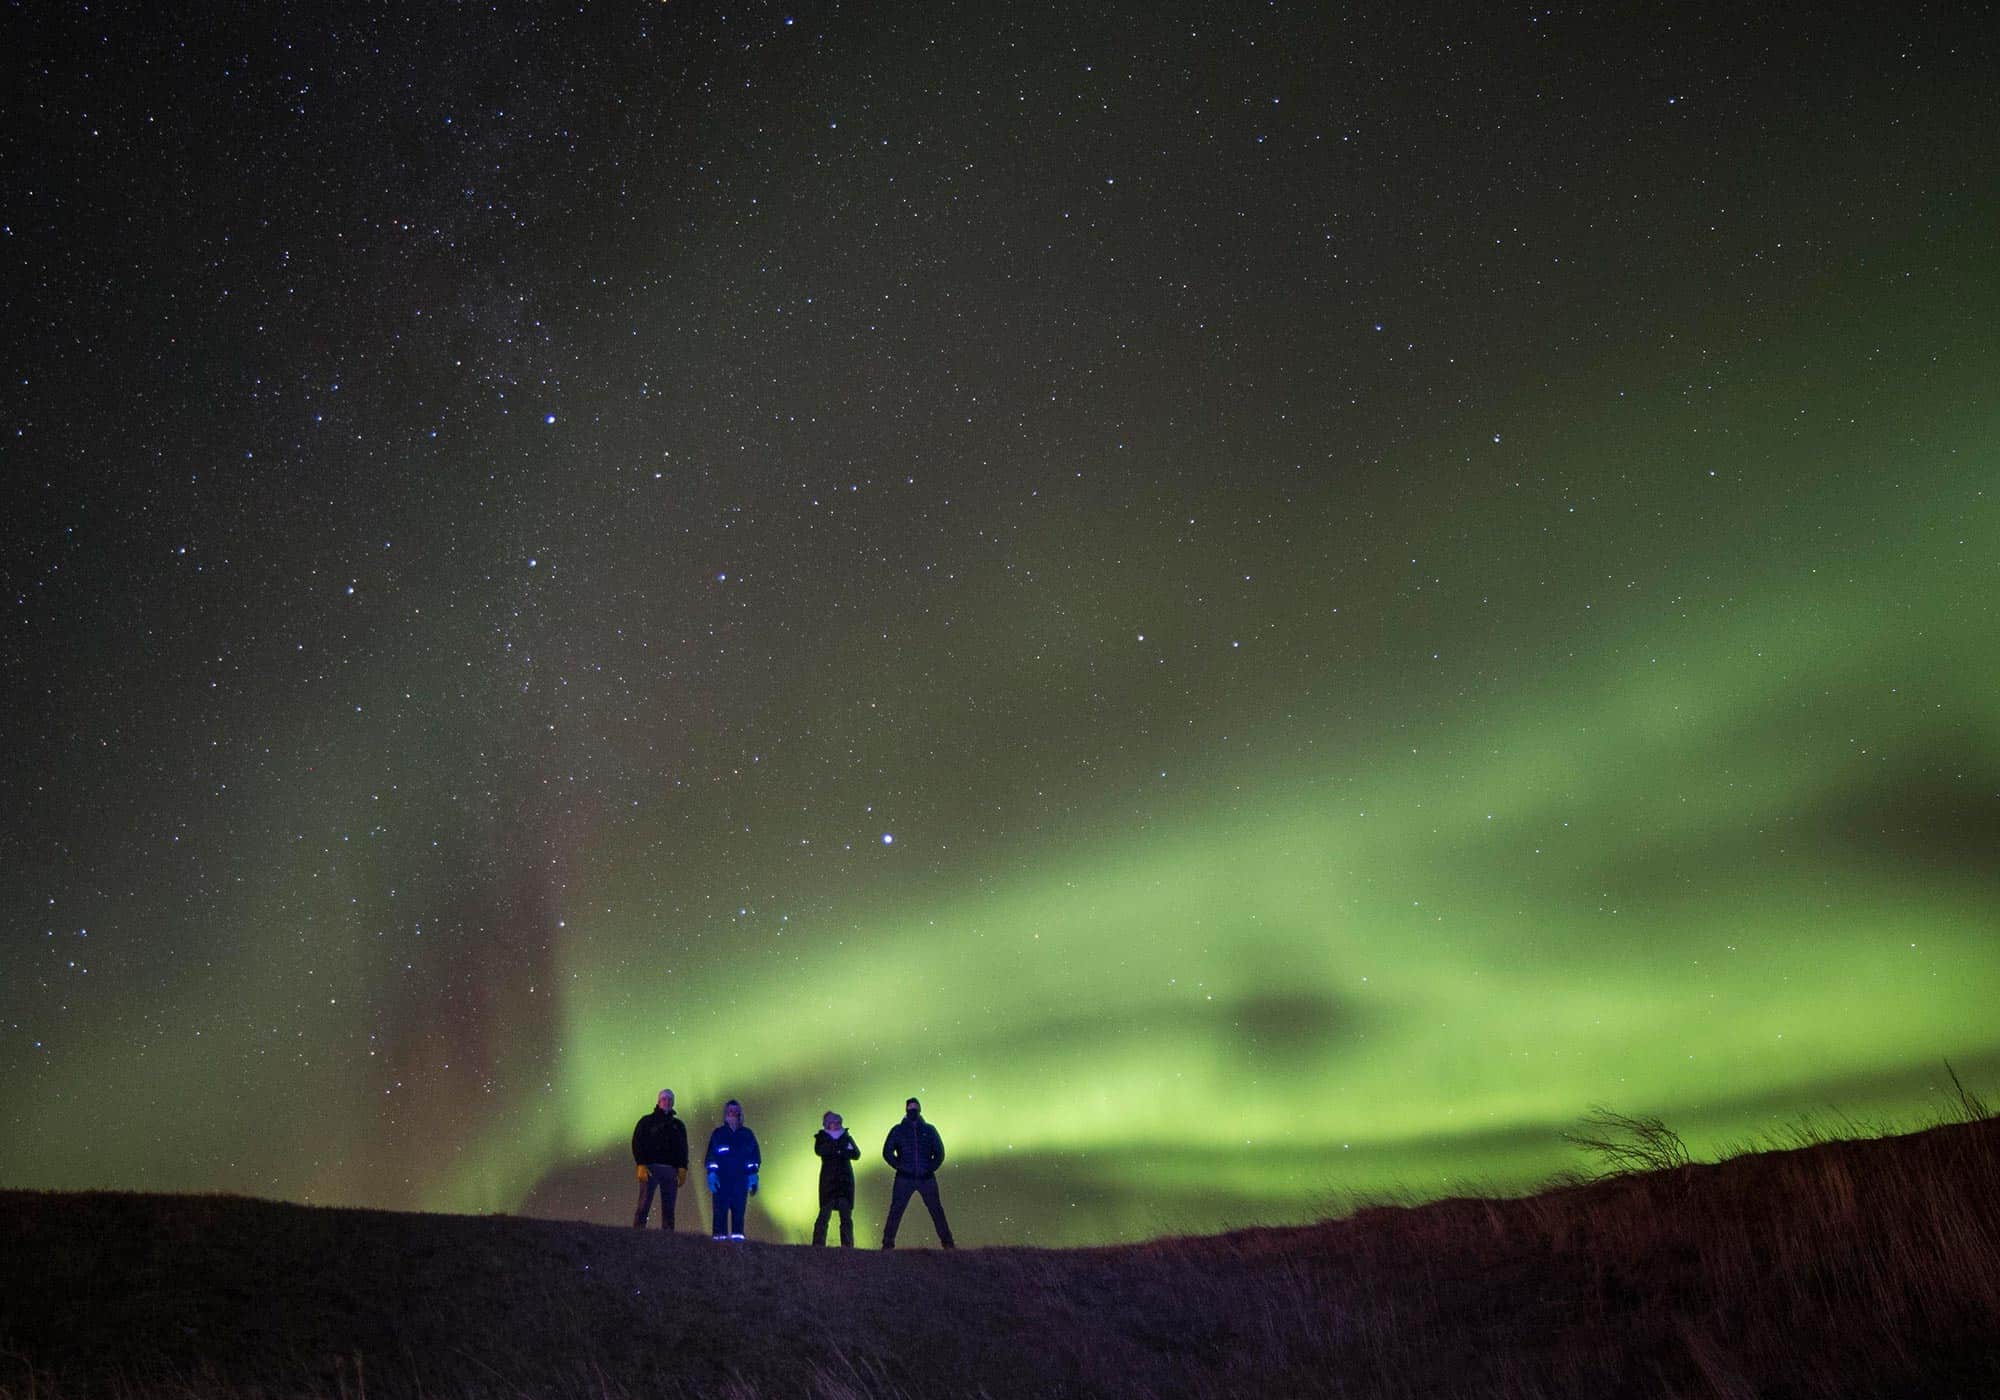 Four people stand underneath the night sky filled with green northern lights and stars.